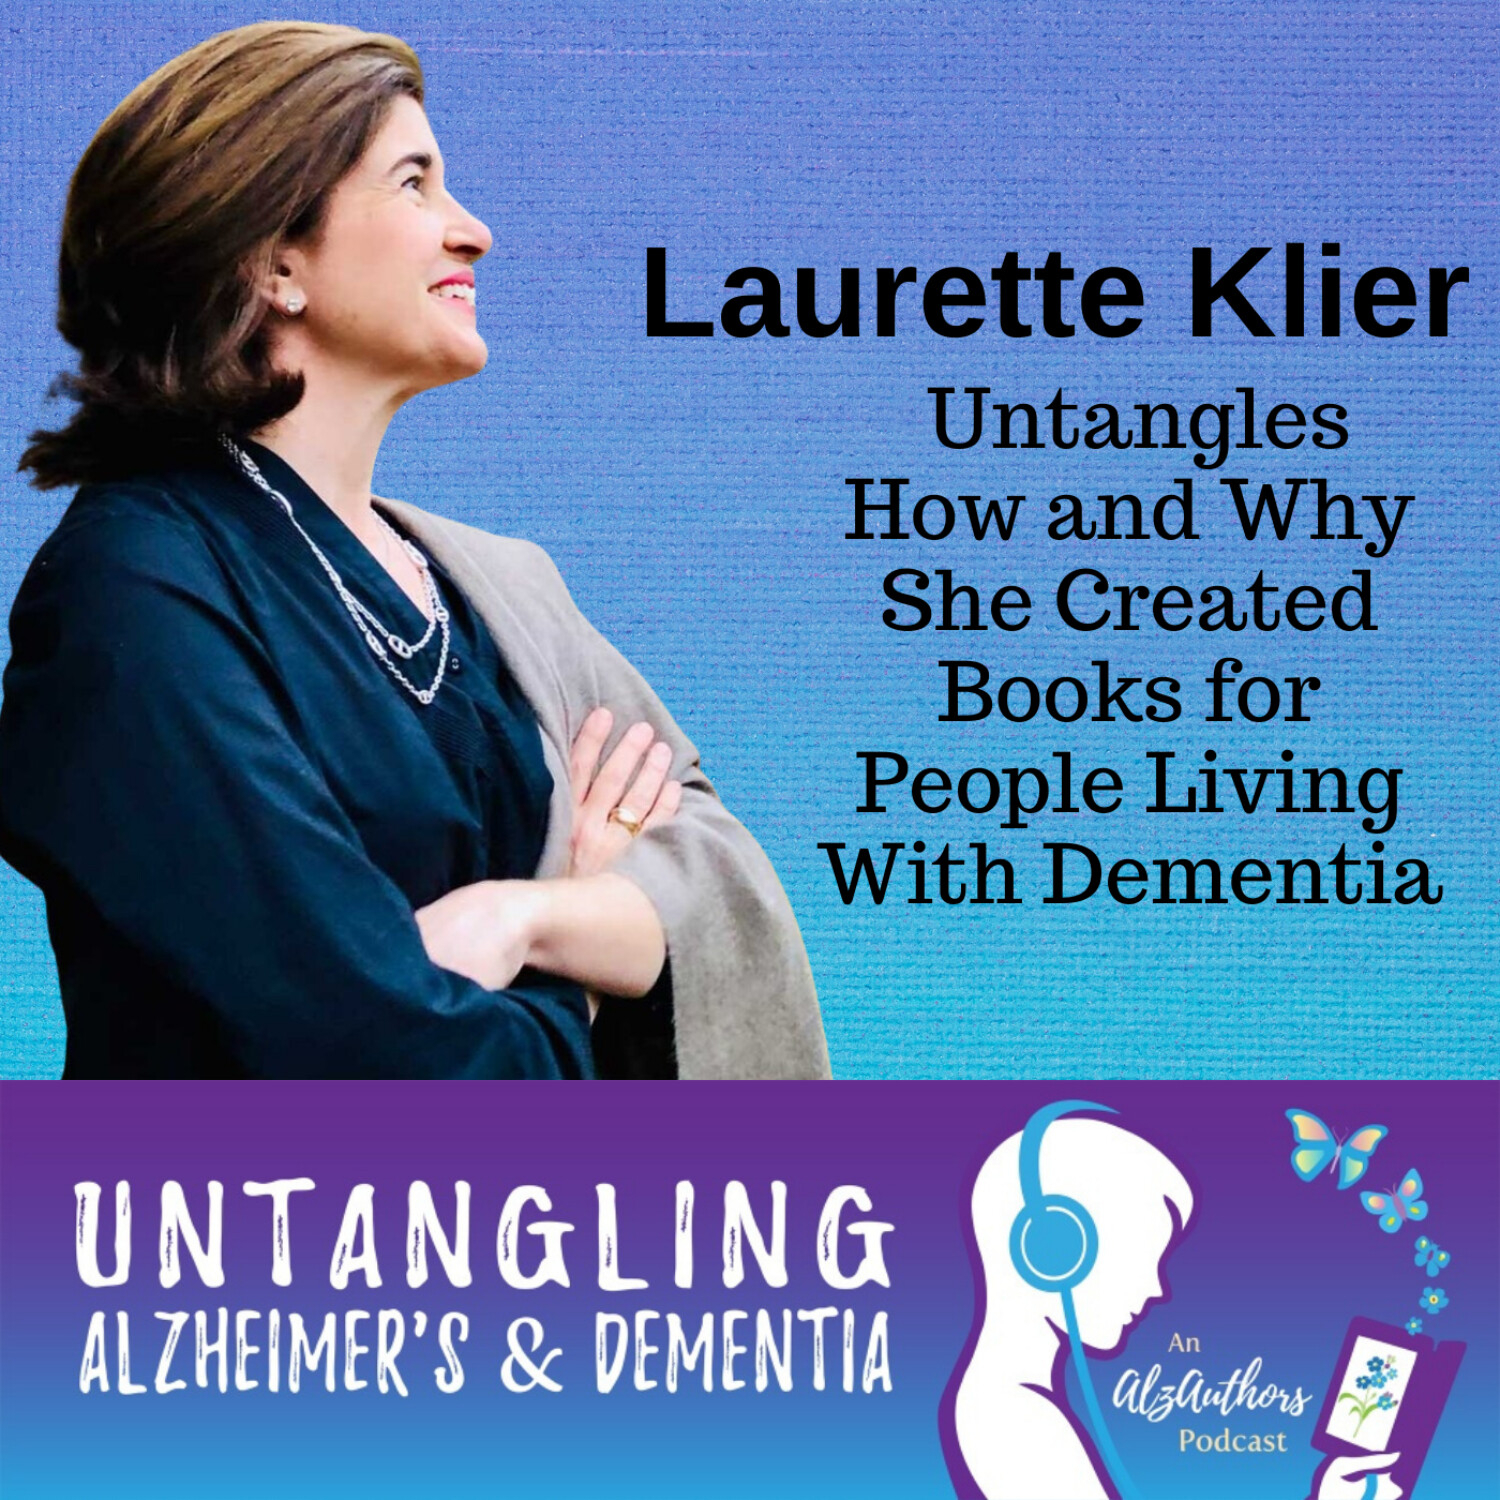 Laurette Klier Untangles How and Why She Created Books for People Living With Dementia